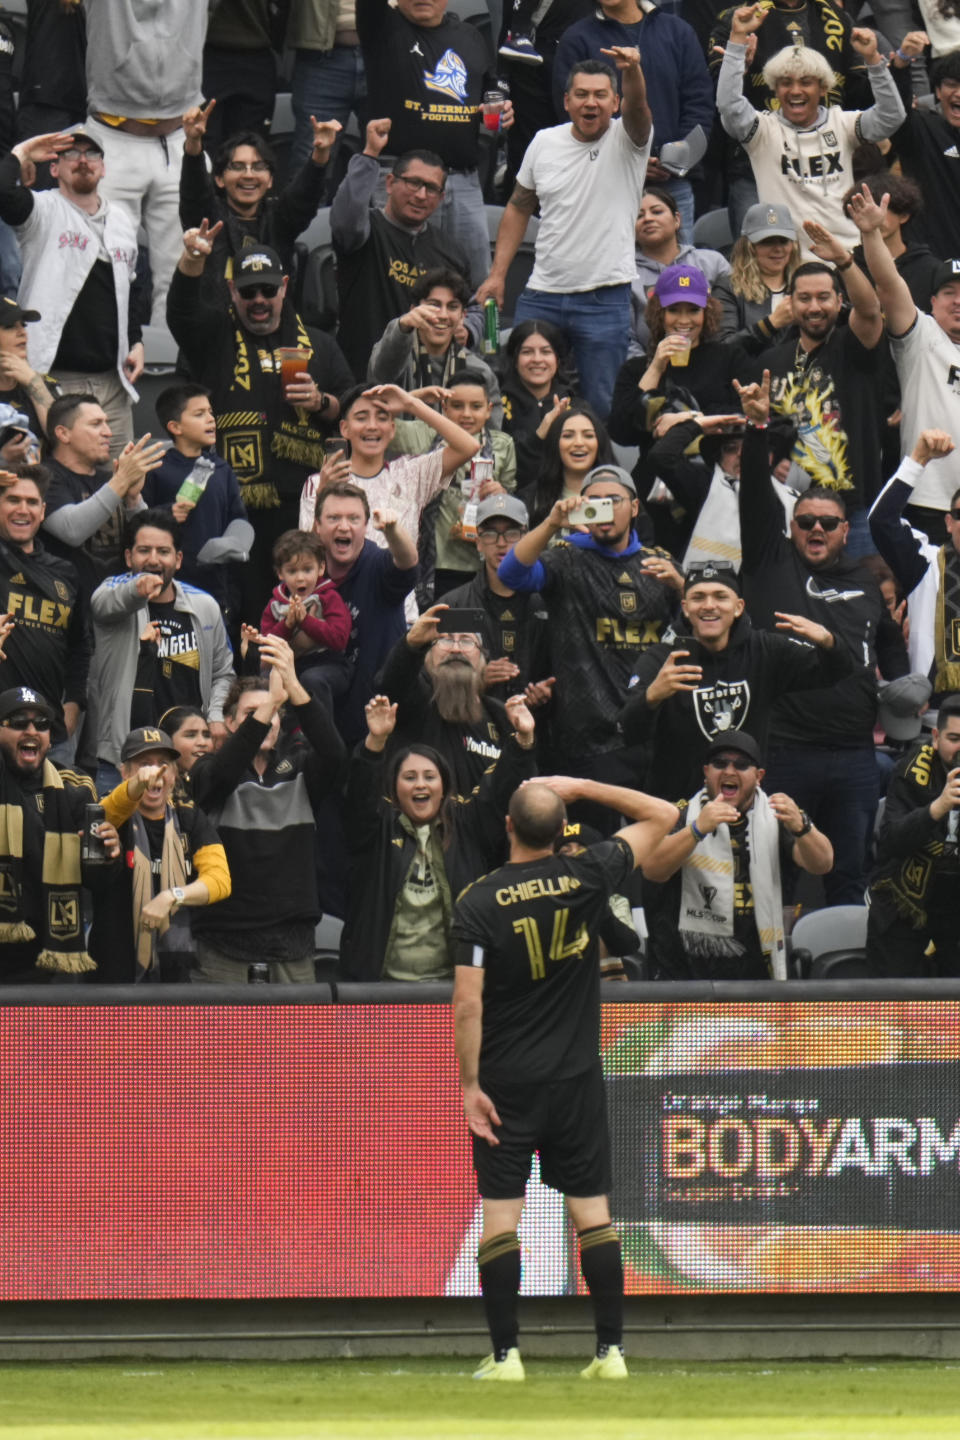 Los Angeles FC defender Giorgio Chiellini (14) salutes to the fans after scoring a goal during the first half of an MLS soccer match against the Portland Timbers Saturday, March 4, 2023, in Los Angeles. (AP Photo/Jae C. Hong)